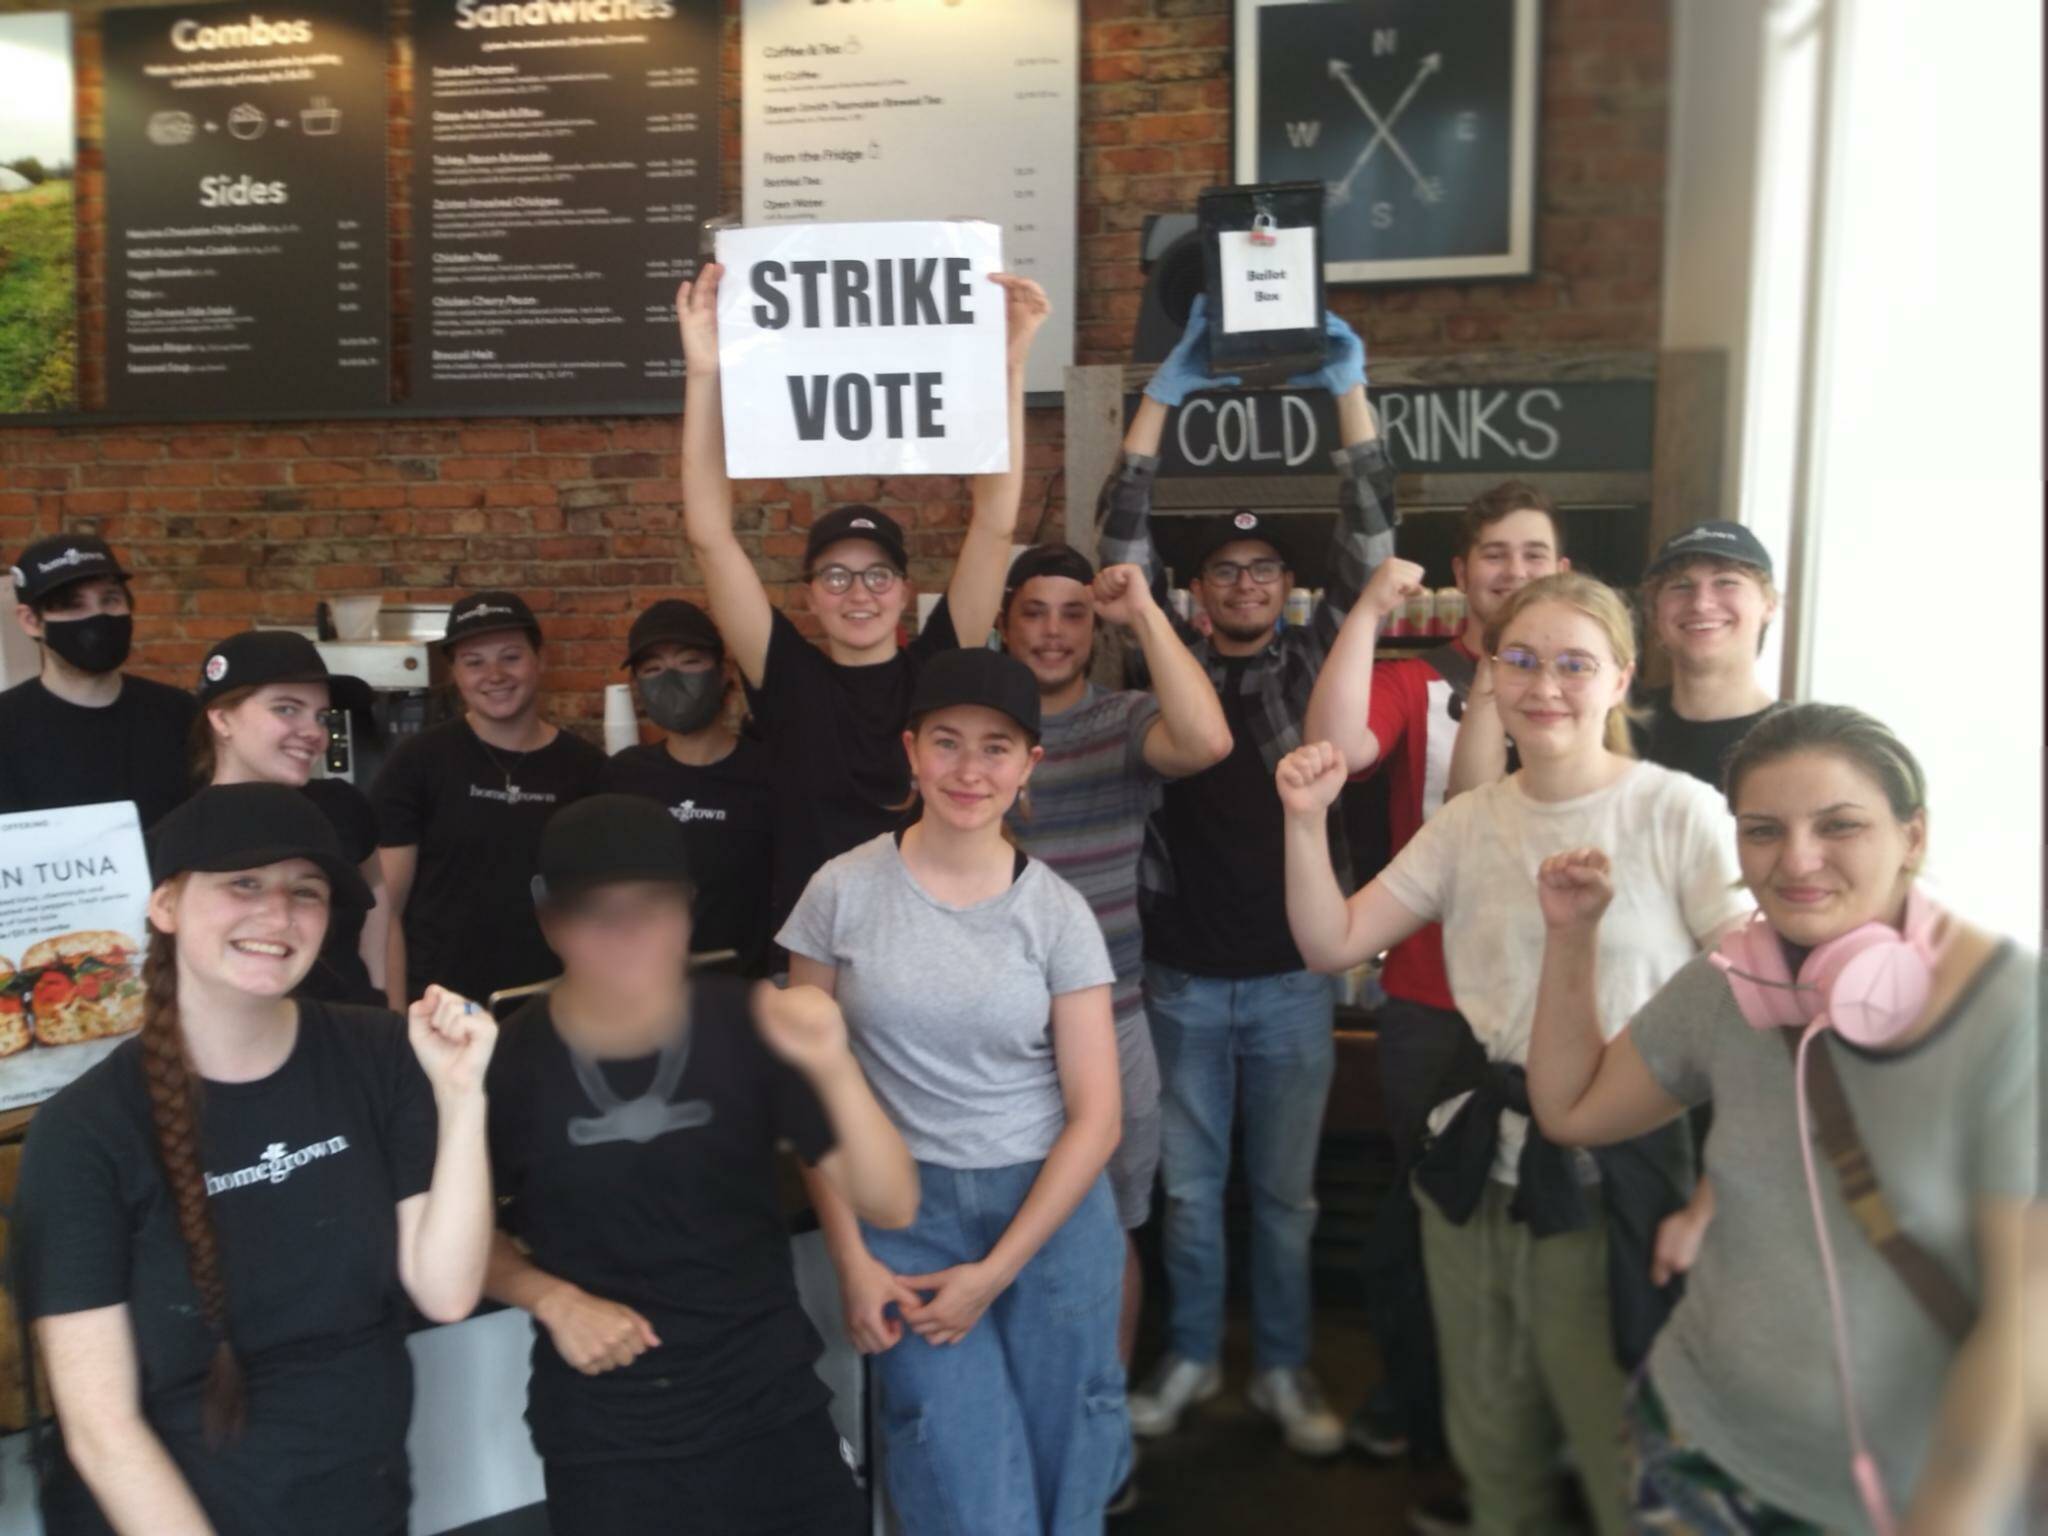 HomeGrown employees at the Redmond location unanimously voted to authorize a strike on August 19 after safety concerns remain unaddressed by management. Courtesy of OurUnionIsHomegrown Twitter.